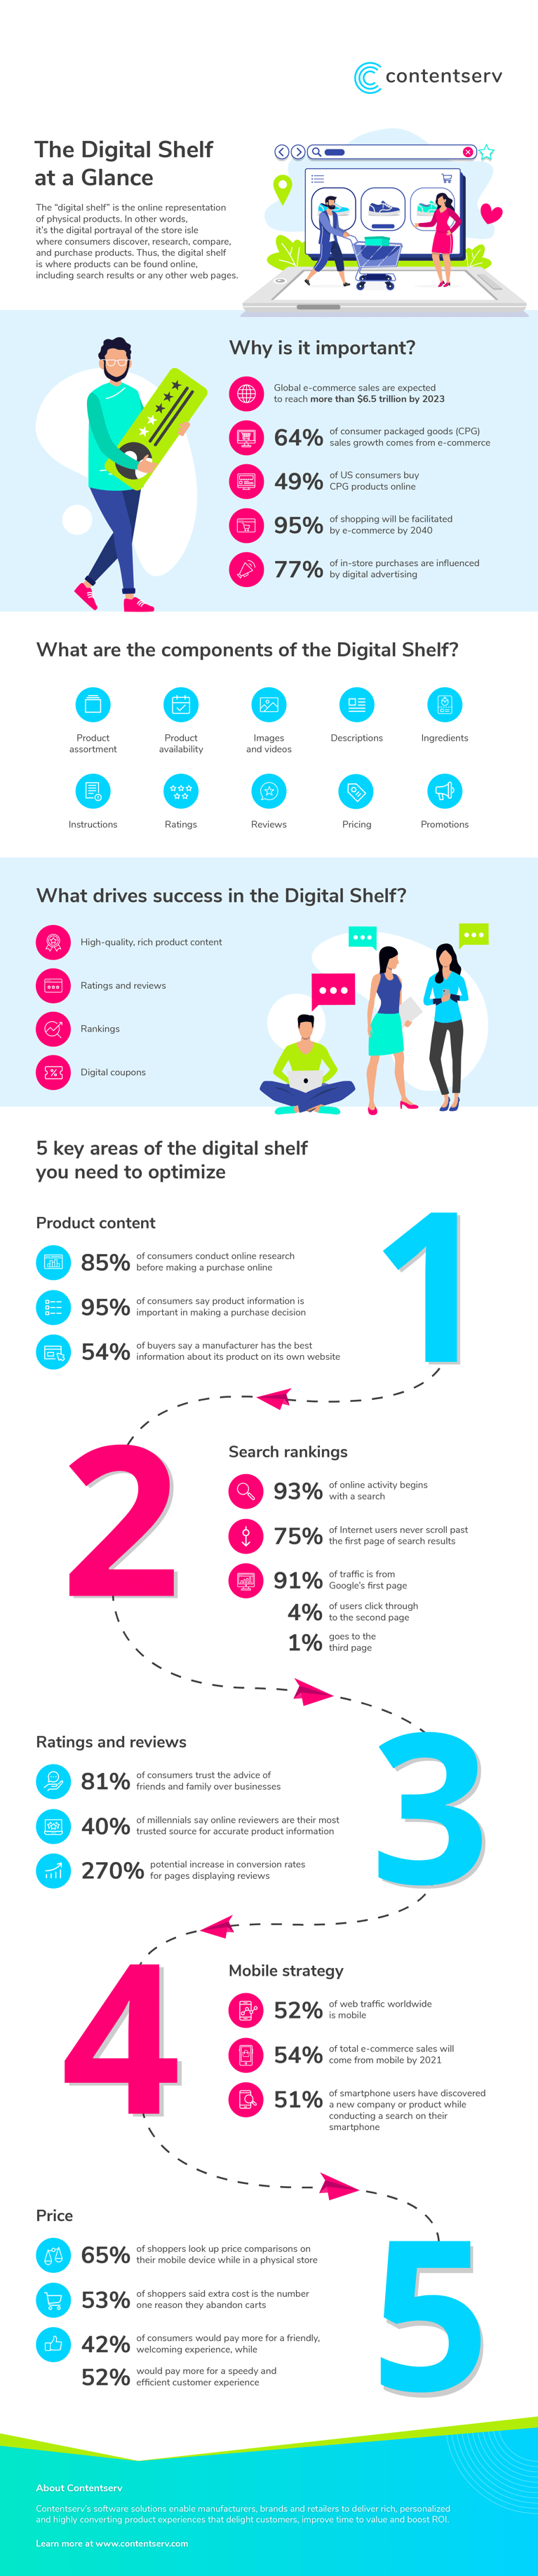 Infographic – The Digital Shelf at a Glance